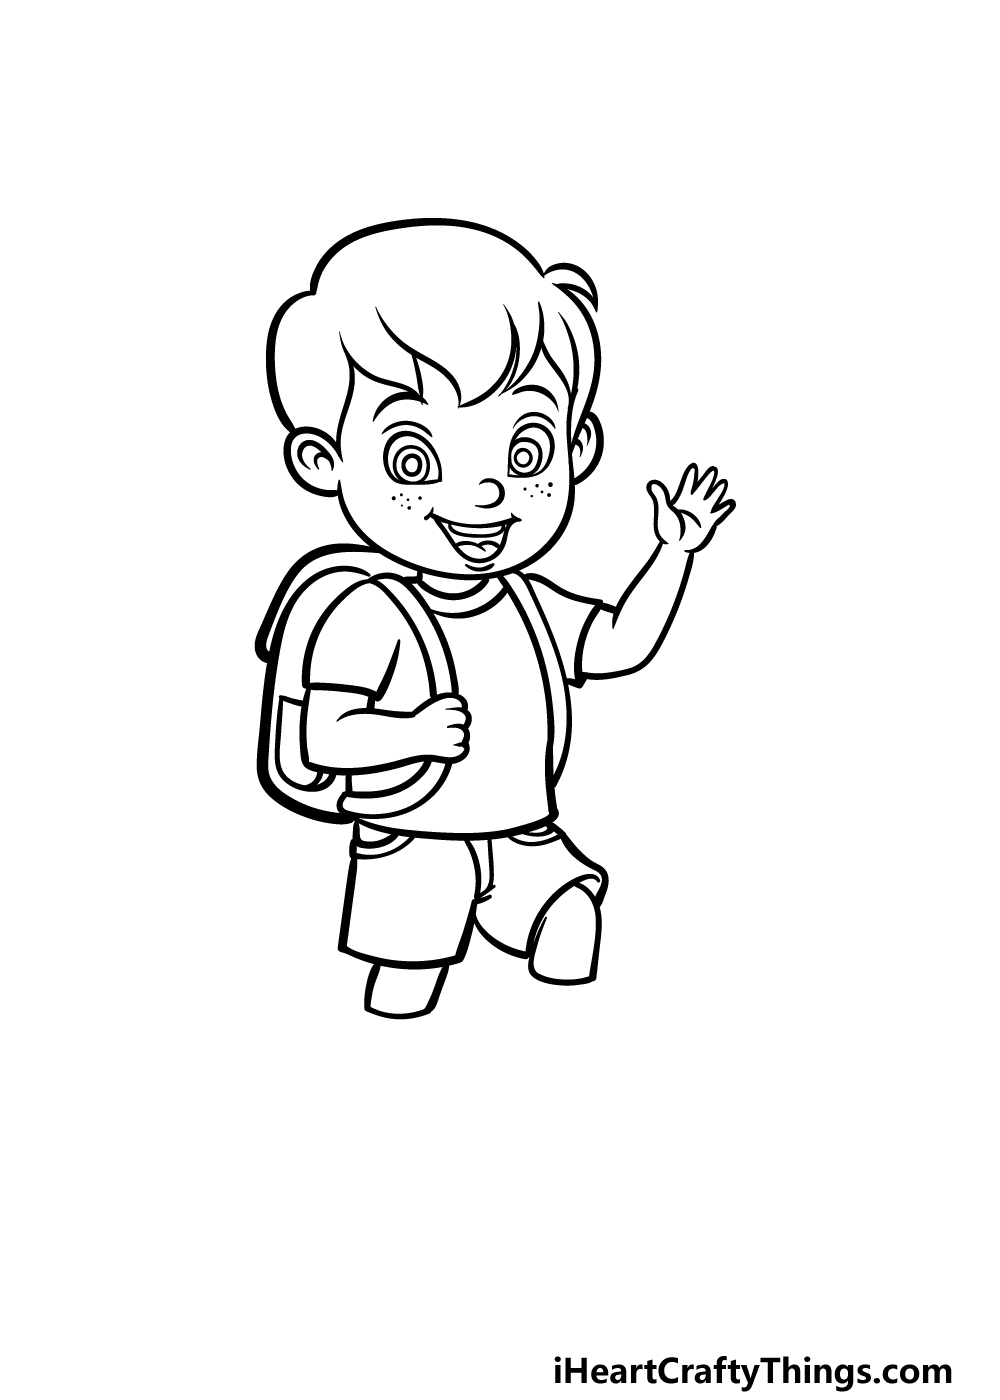 how to draw a Little Boy step 4